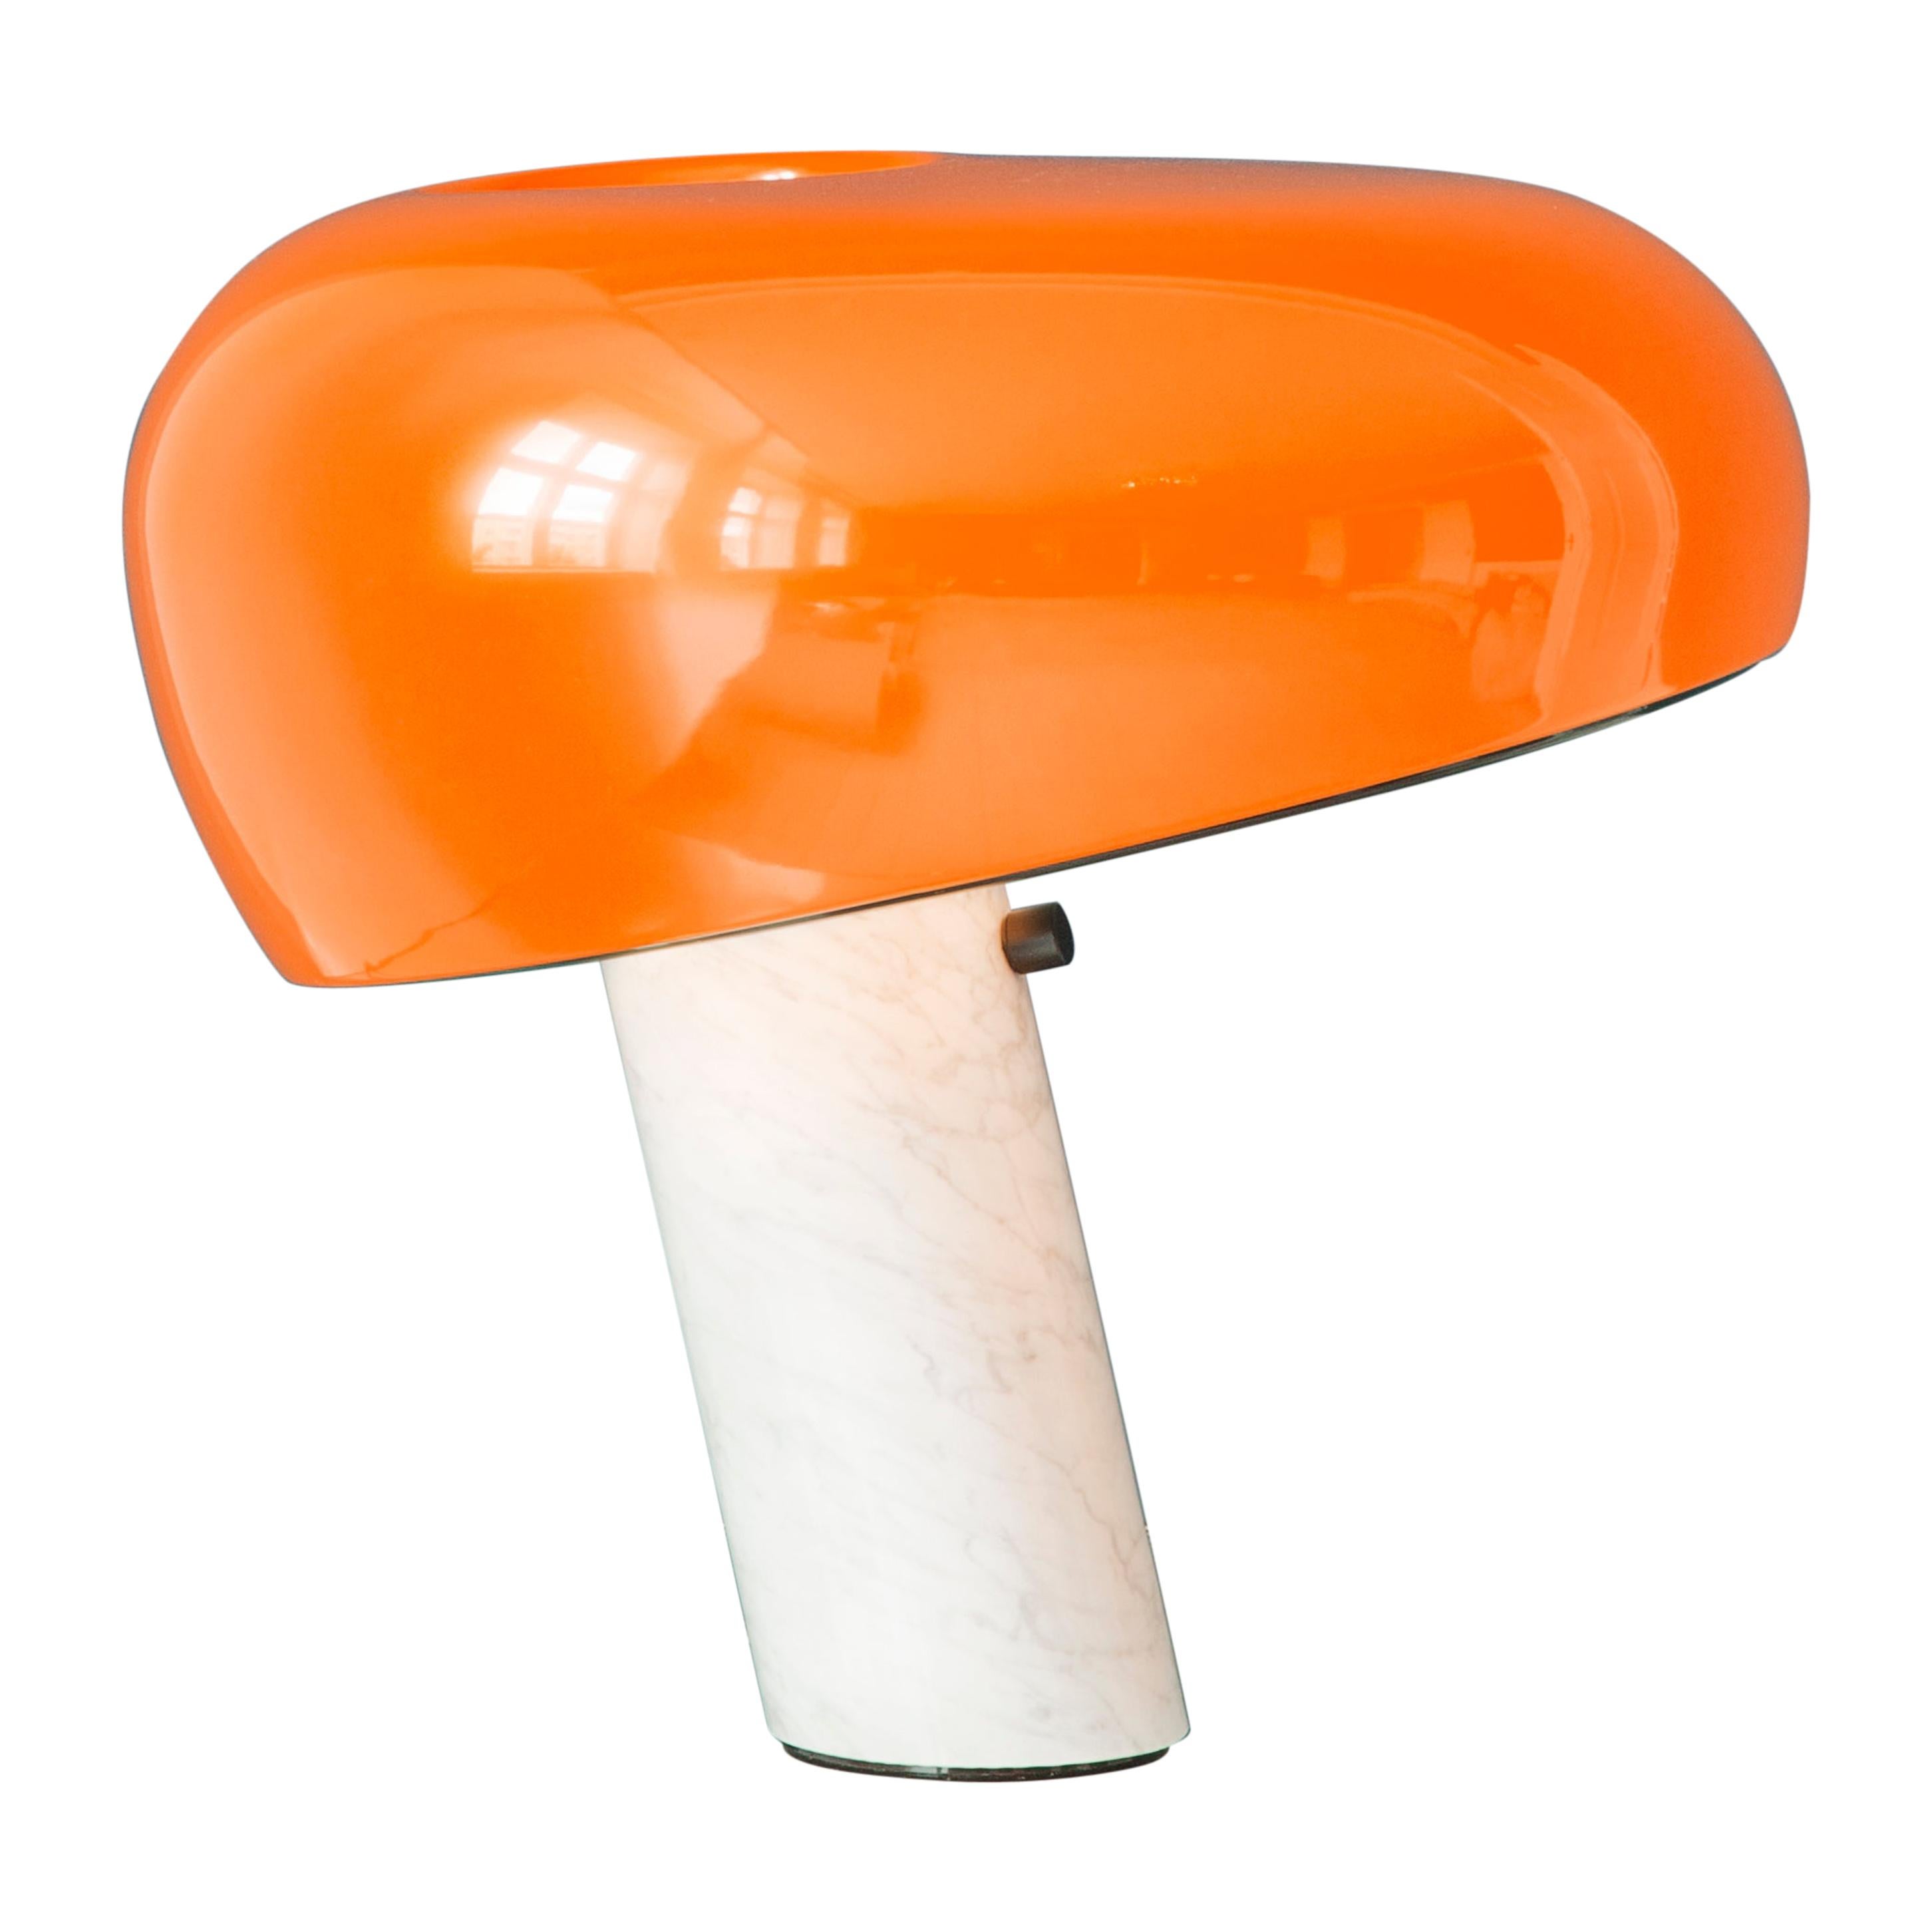 Contemporary Italian Flos Snoopy Table Lamp with Marble Base and Orange Shade